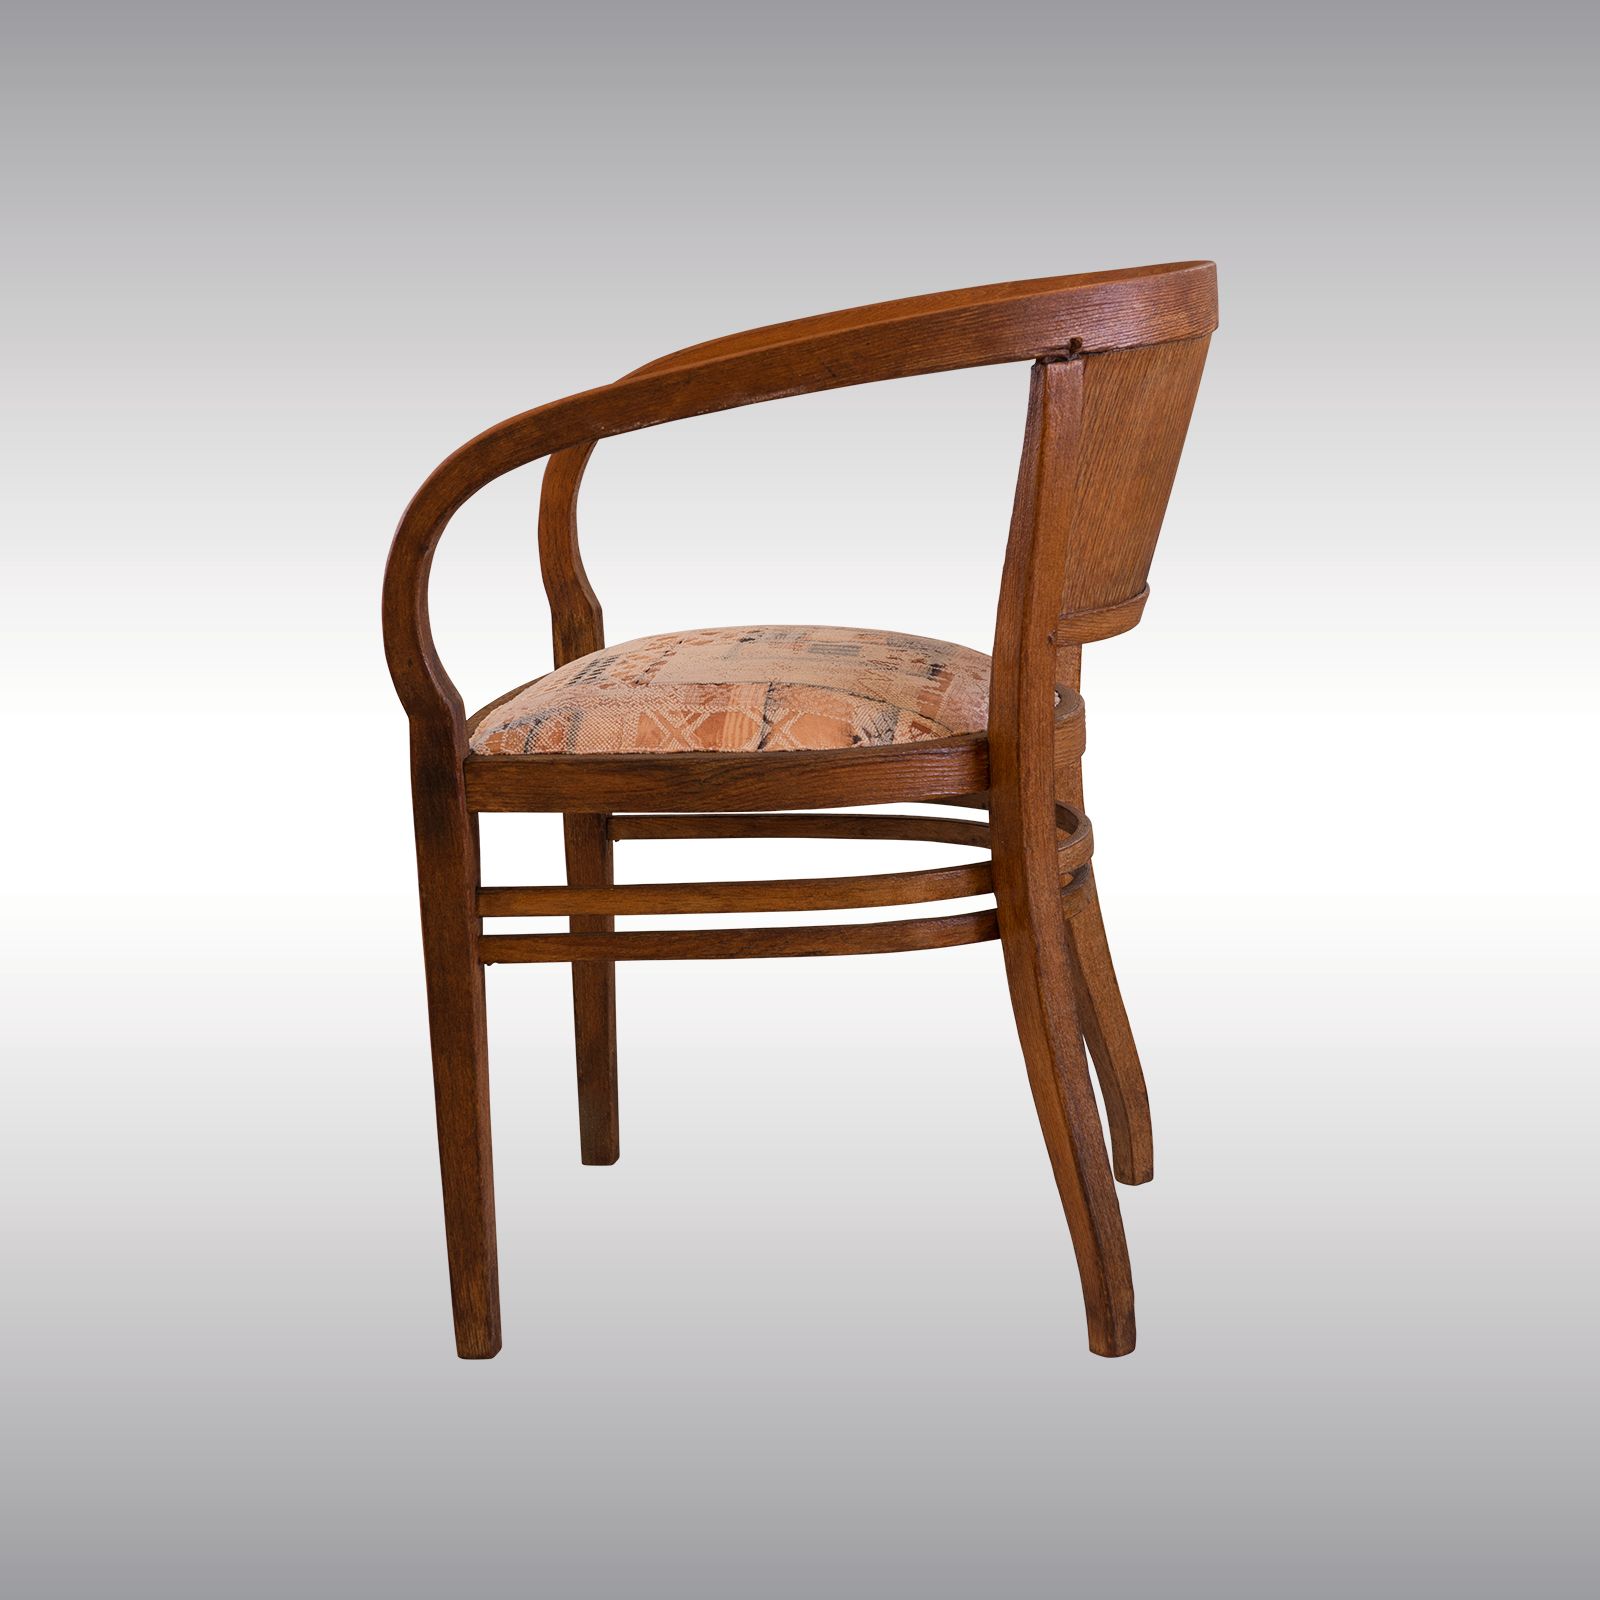 WOKA LAMPS VIENNA - OrderNr.: 80074|Extremely rare and beautiful Otto Wagner Chair by Thonet 1901 - Design: Otto Wagner